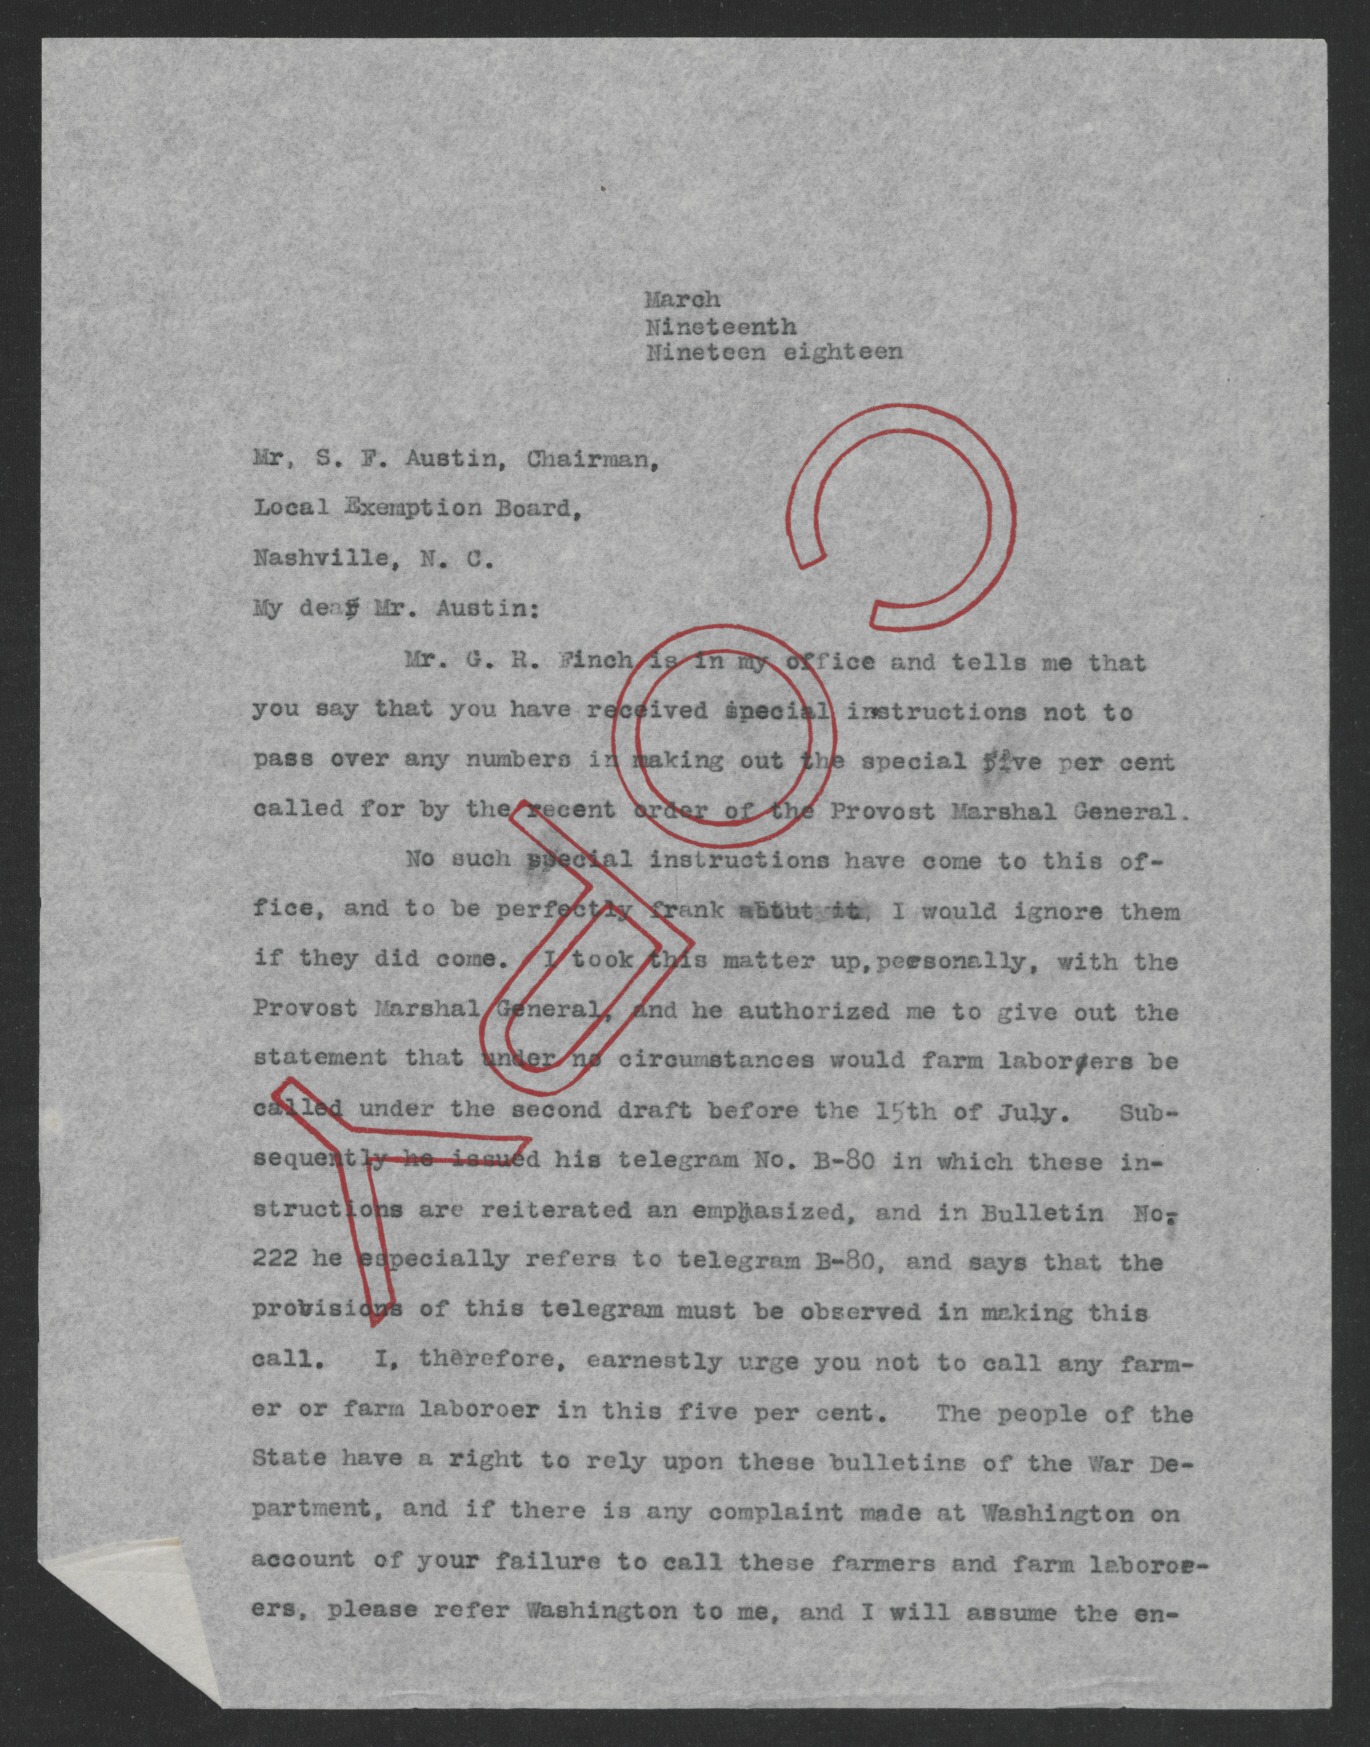 Letter from Thomas W. Bickett to Samuel F. Austin, March 19, 1918, page 1